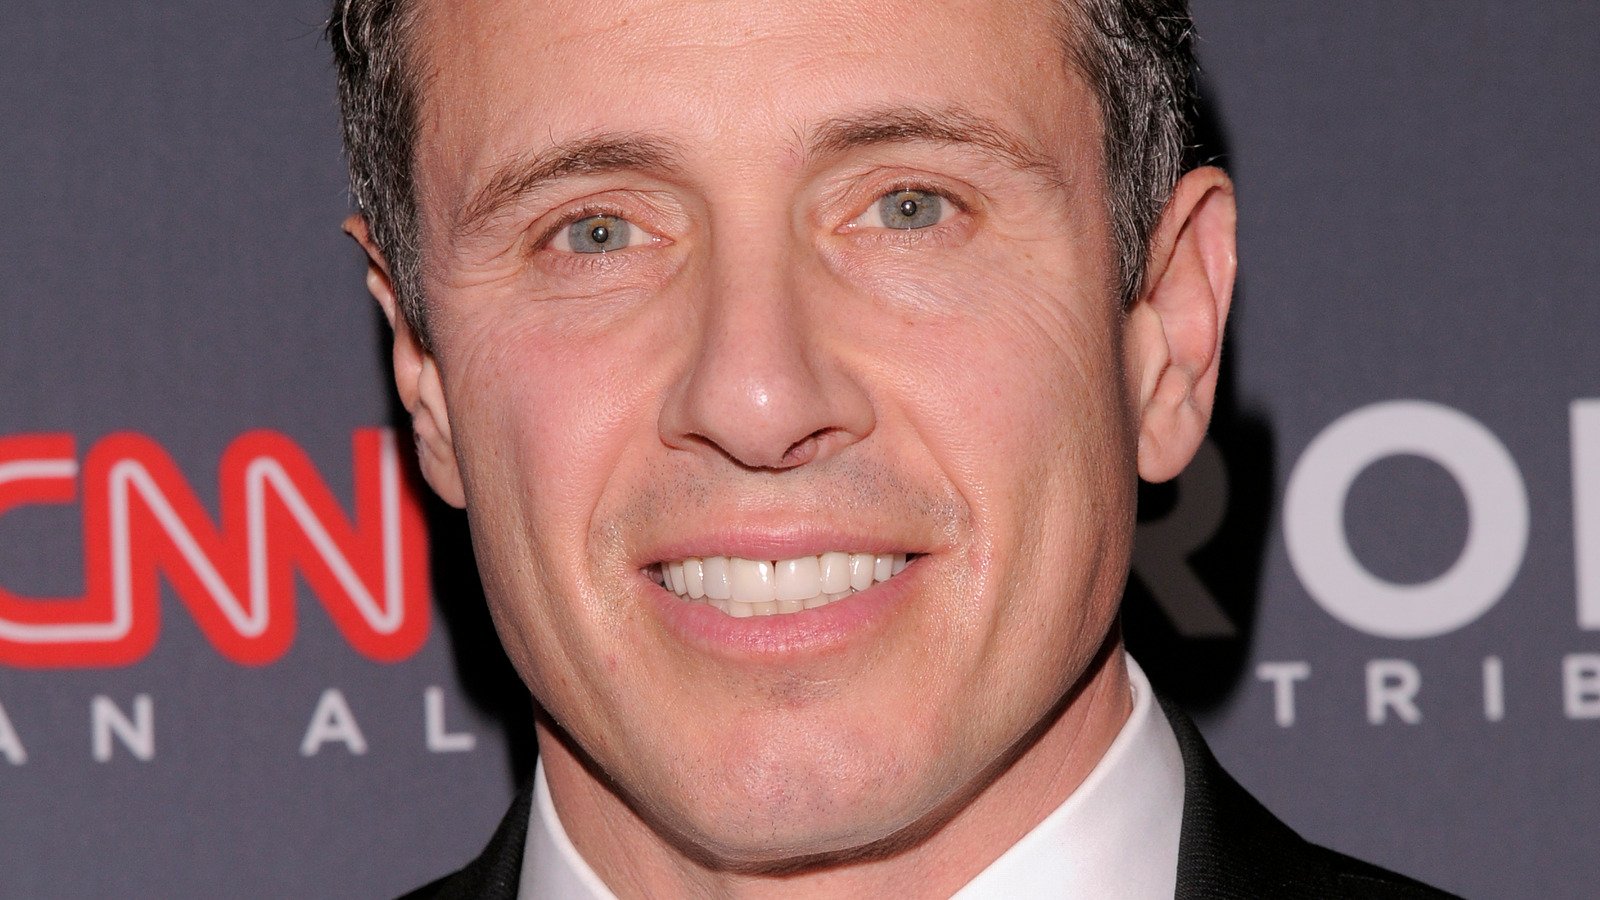 What CNN Noticed After Chris Cuomo's Suspension